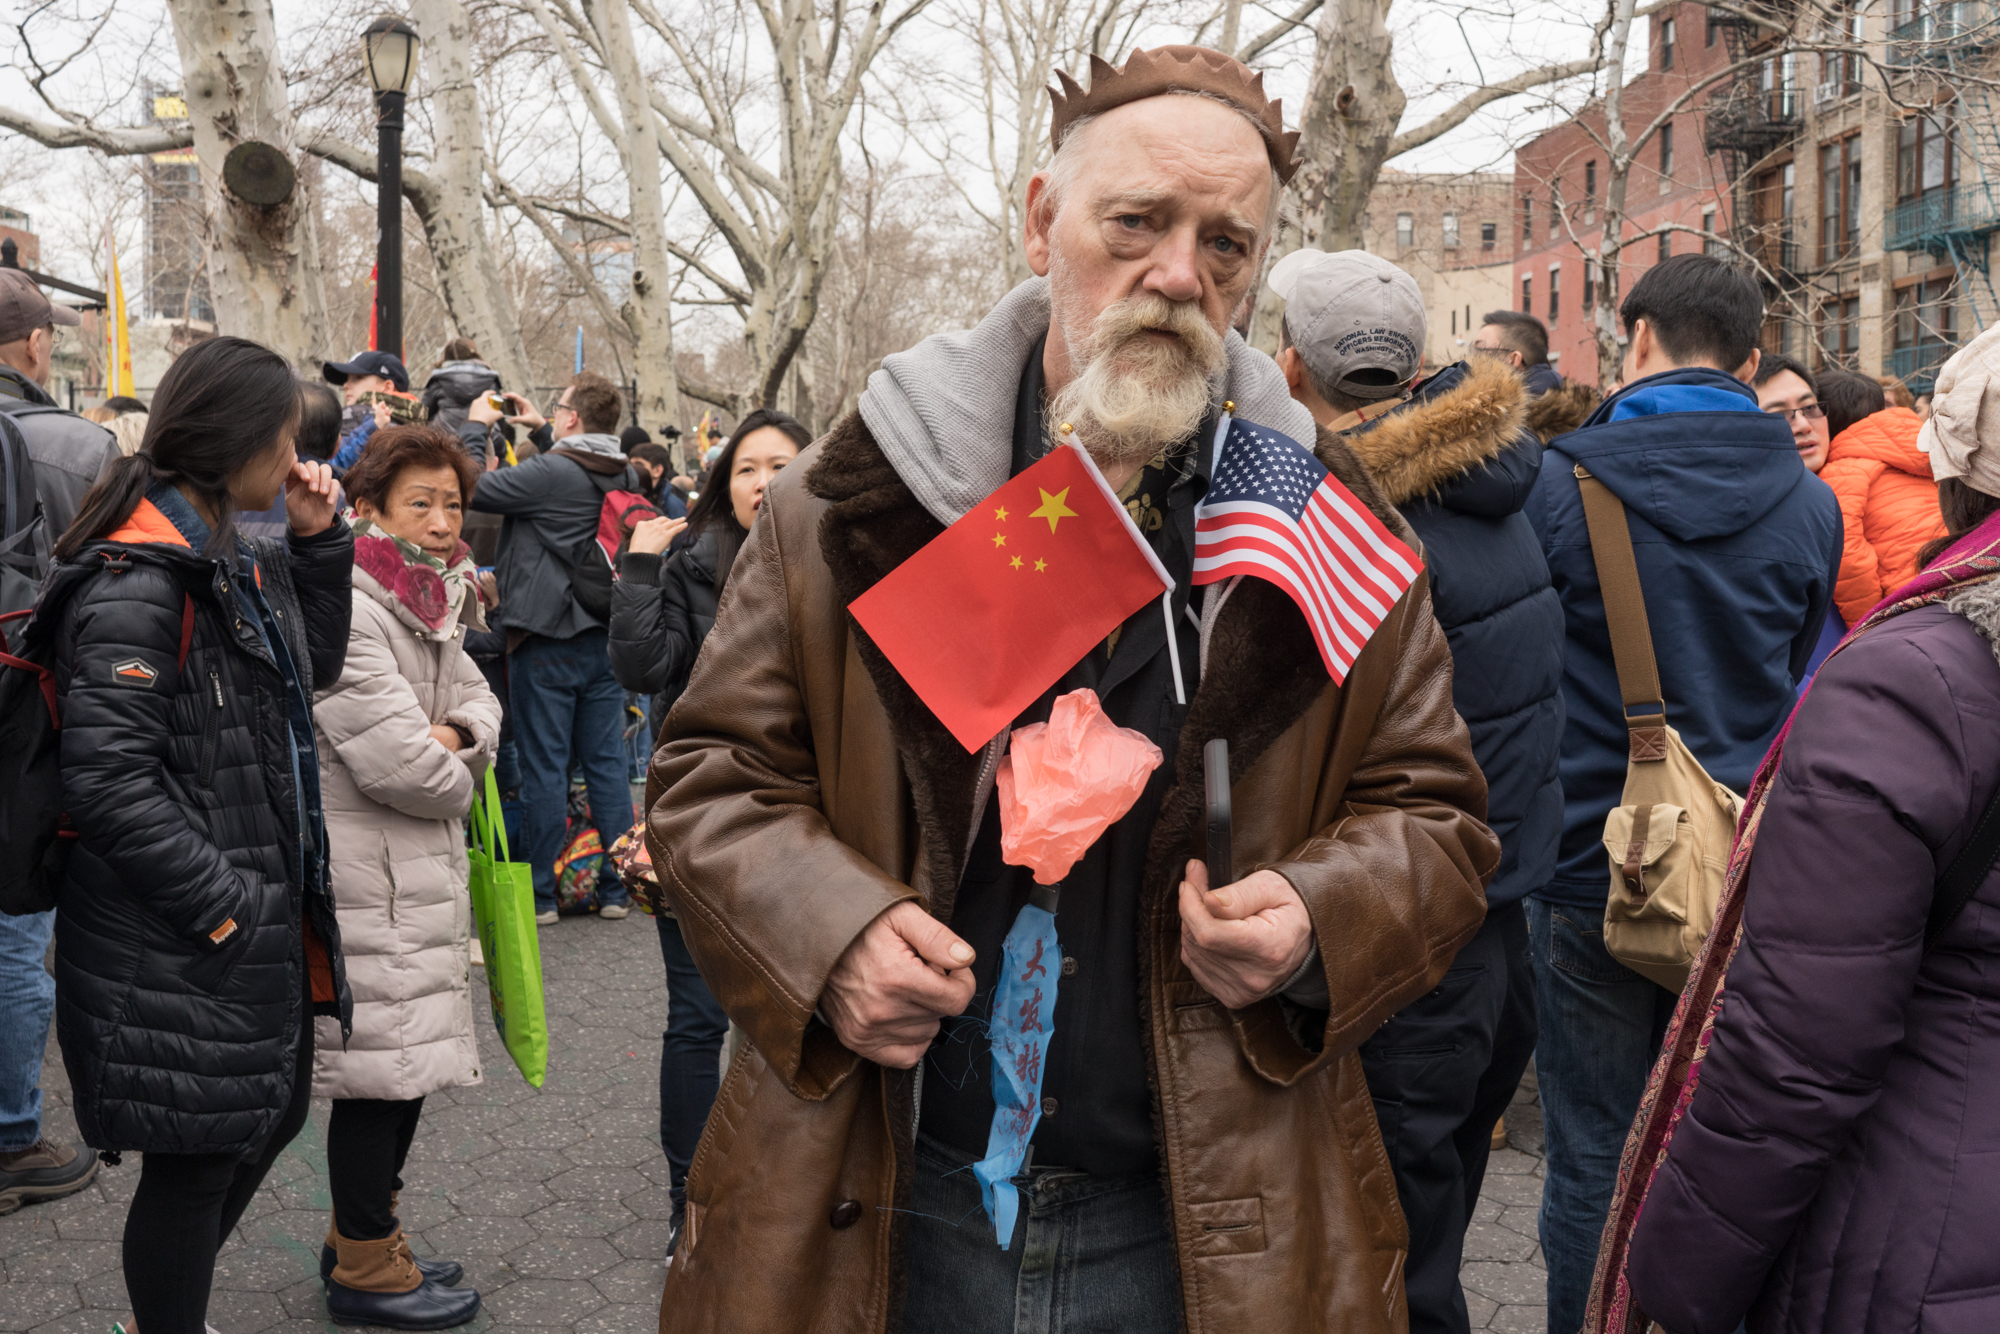 Chinese Lunar New Year Parade, 2018